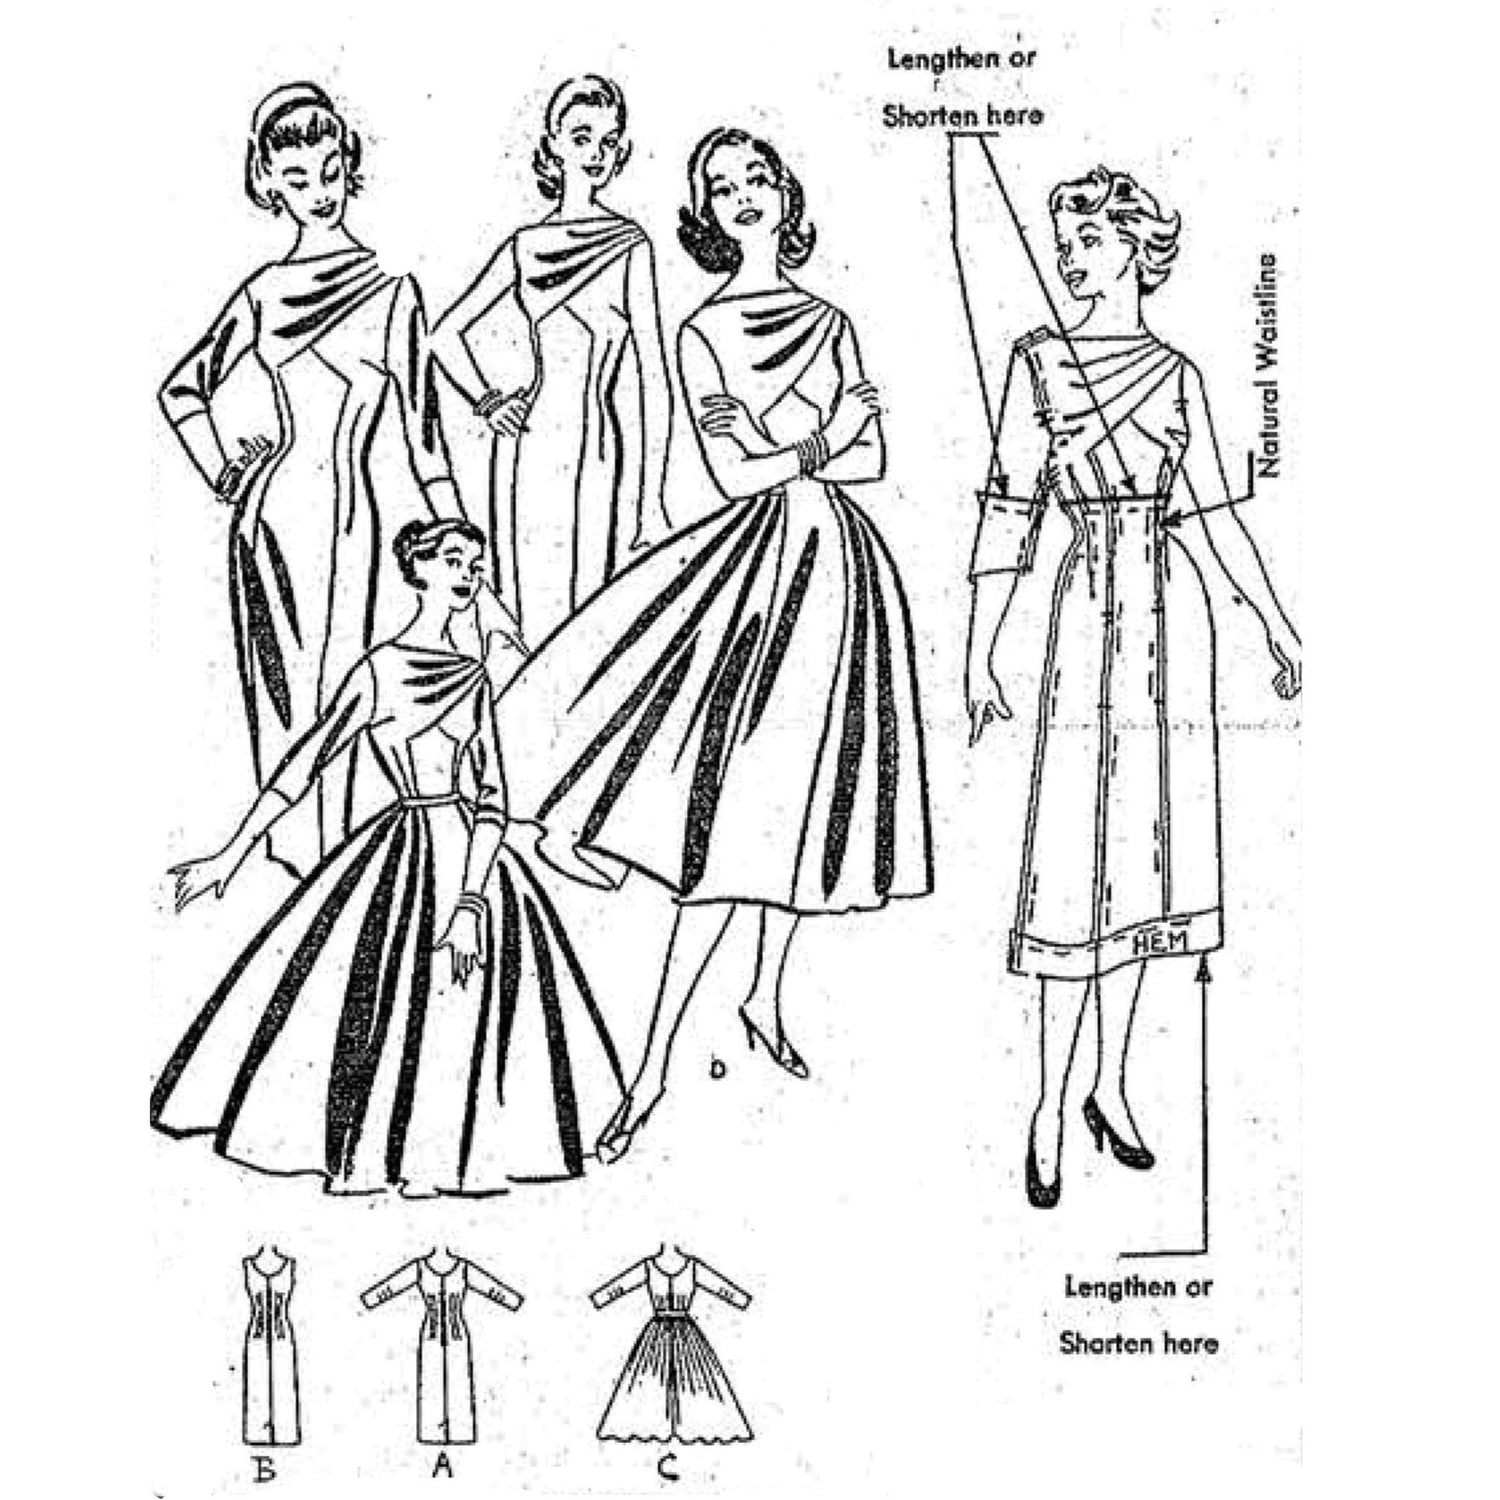 PDF - 1950s Pattern, Princess Line Dress in Four Elegant Styles - Multi sizes - Instantly Print at Home 4 women in dresses